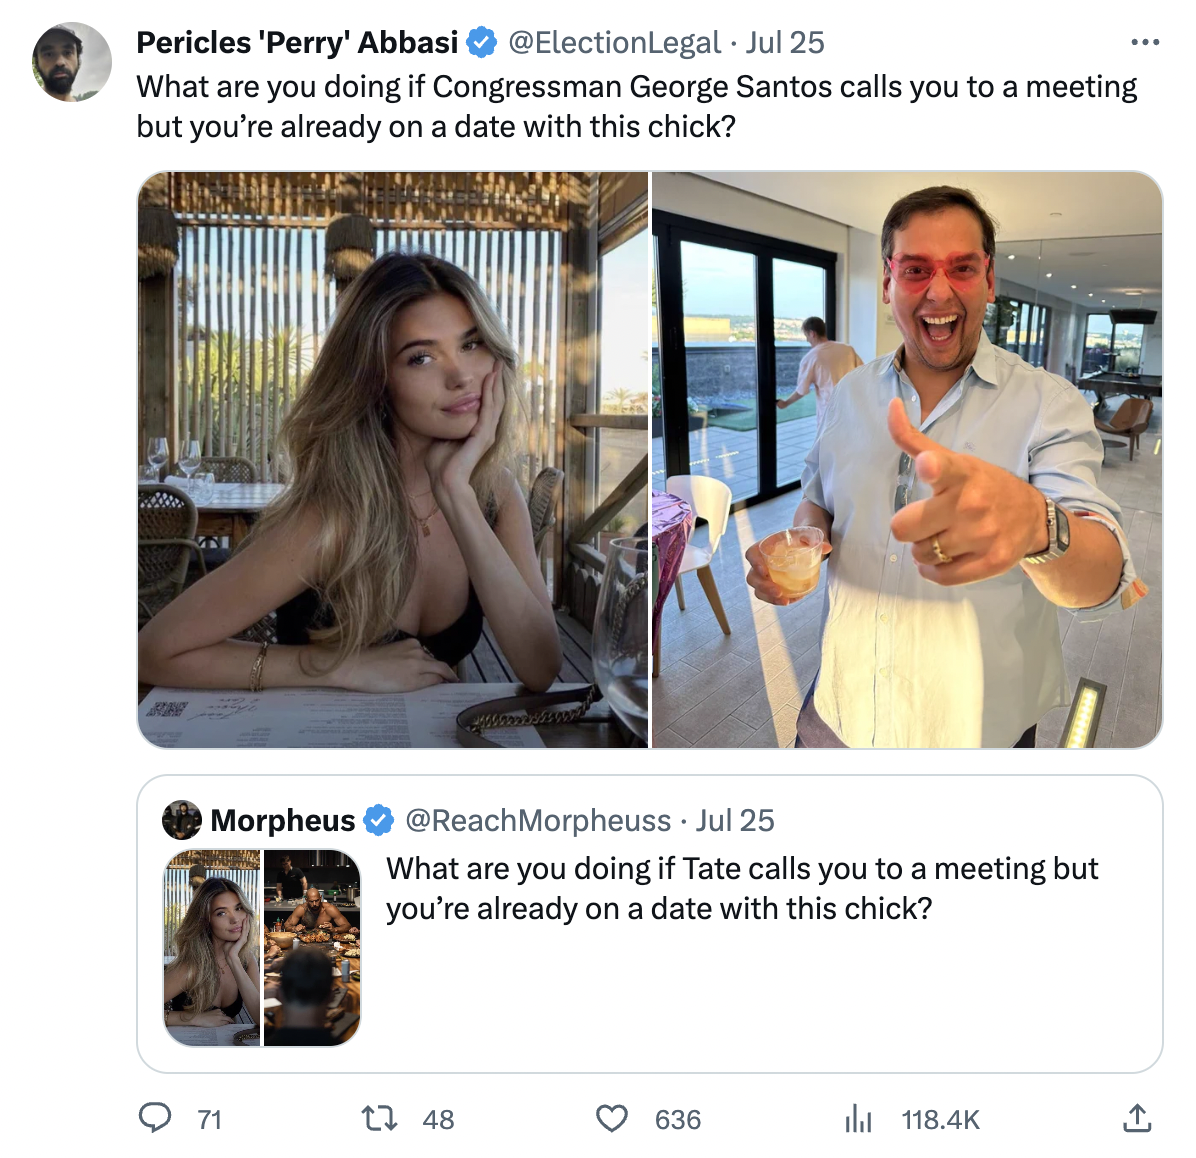 andrew tate fans date - photo caption - Pericles 'Perry' Abbasi Jul 25 What are you doing if Congressman George Santos calls you to a meeting but you're already on a date with this chick? Morpheus Jul 25 71 What are you doing if Tate calls you to a meetin